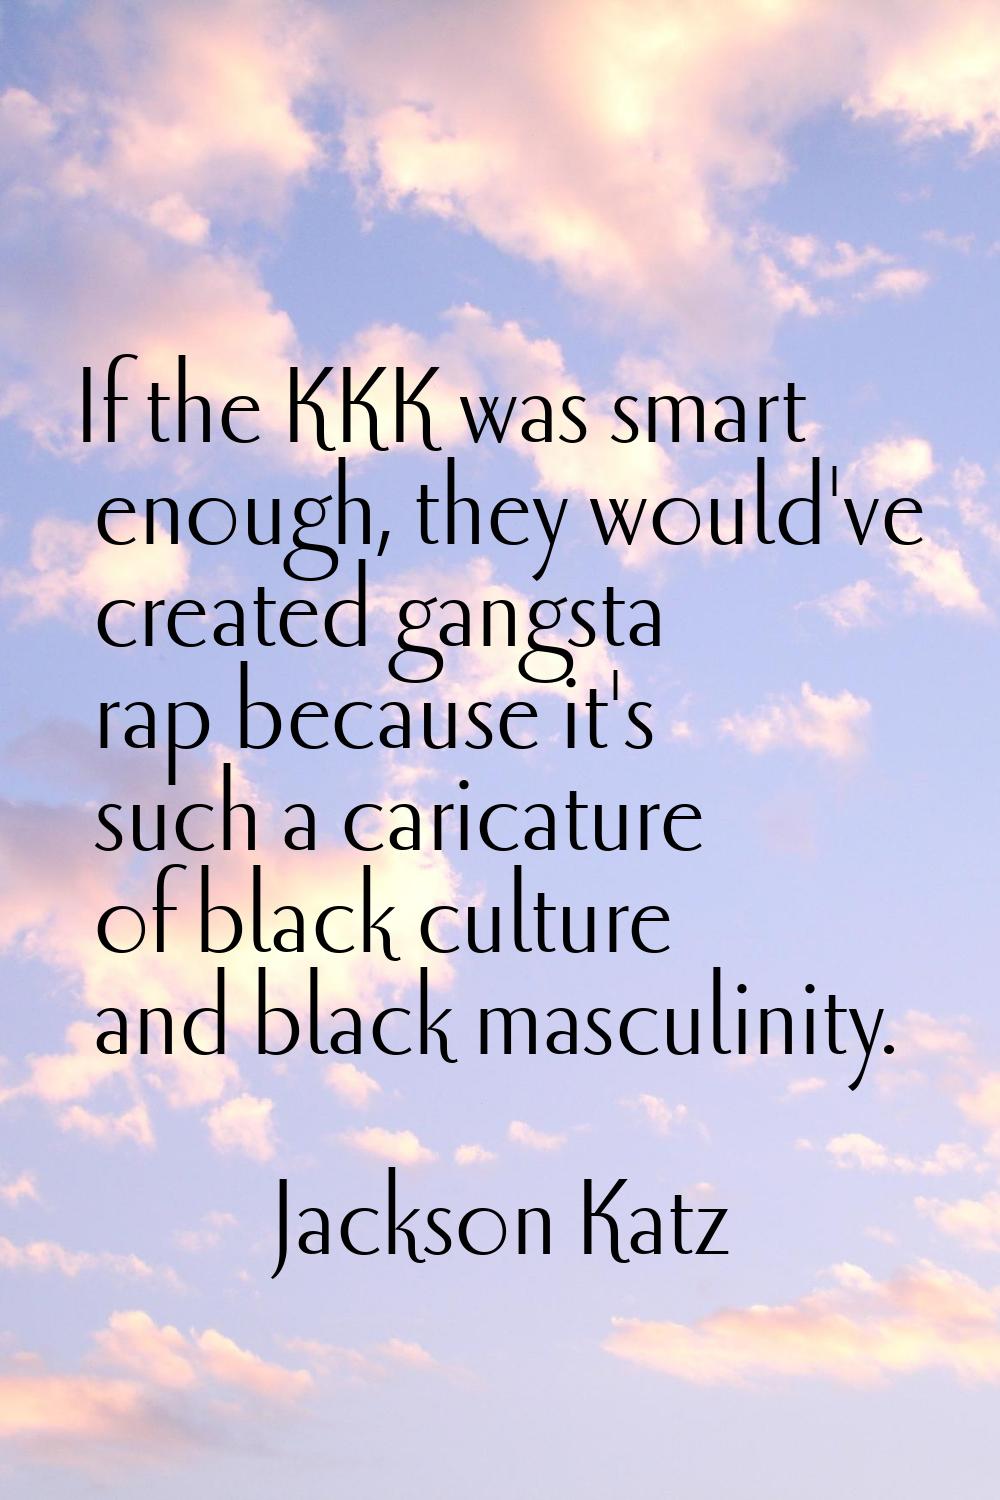 If the KKK was smart enough, they would've created gangsta rap because it's such a caricature of bl